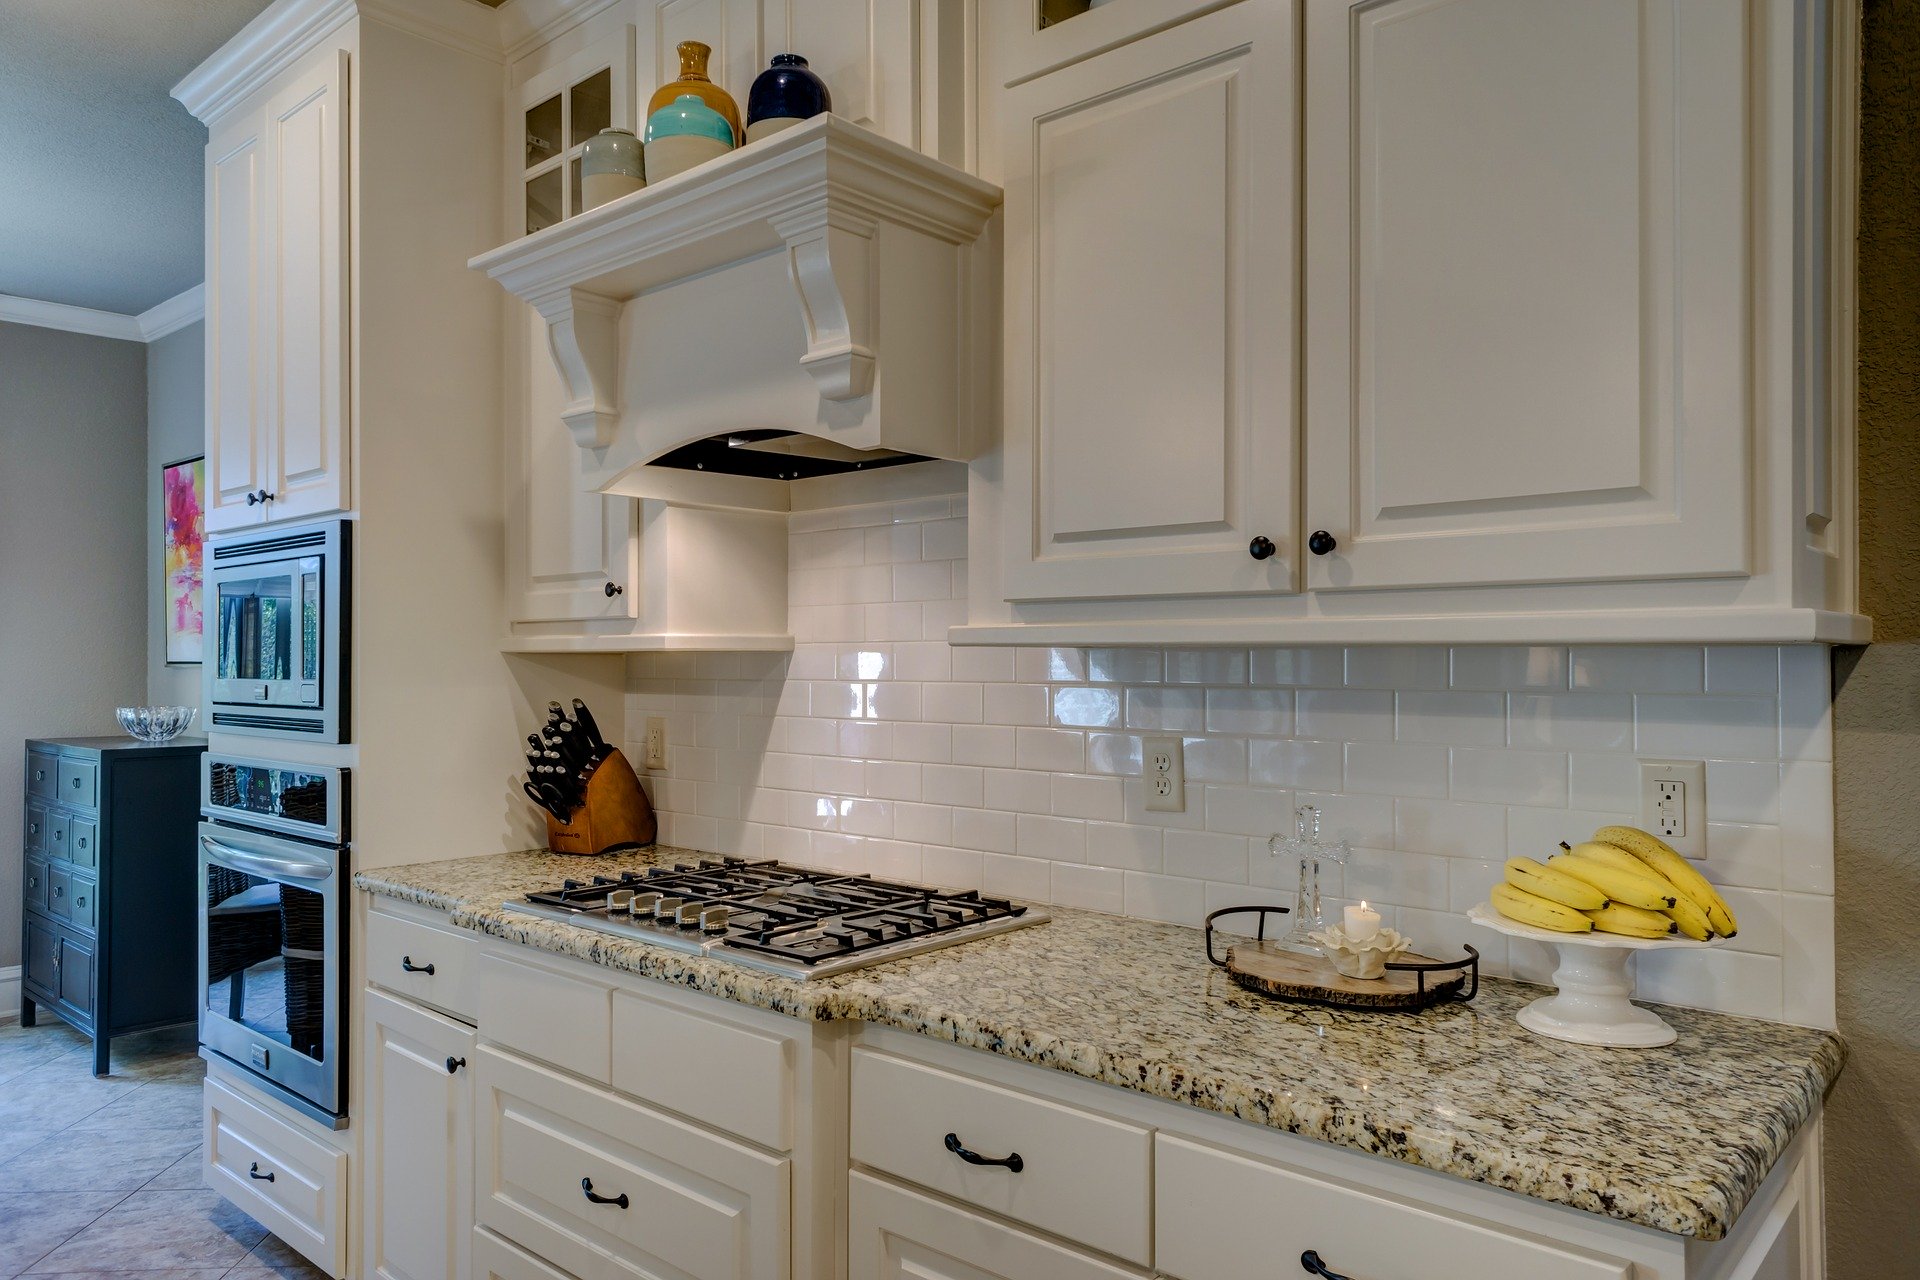 Tips On Selecting A New Color For Your Kitchen Cabinets Portland